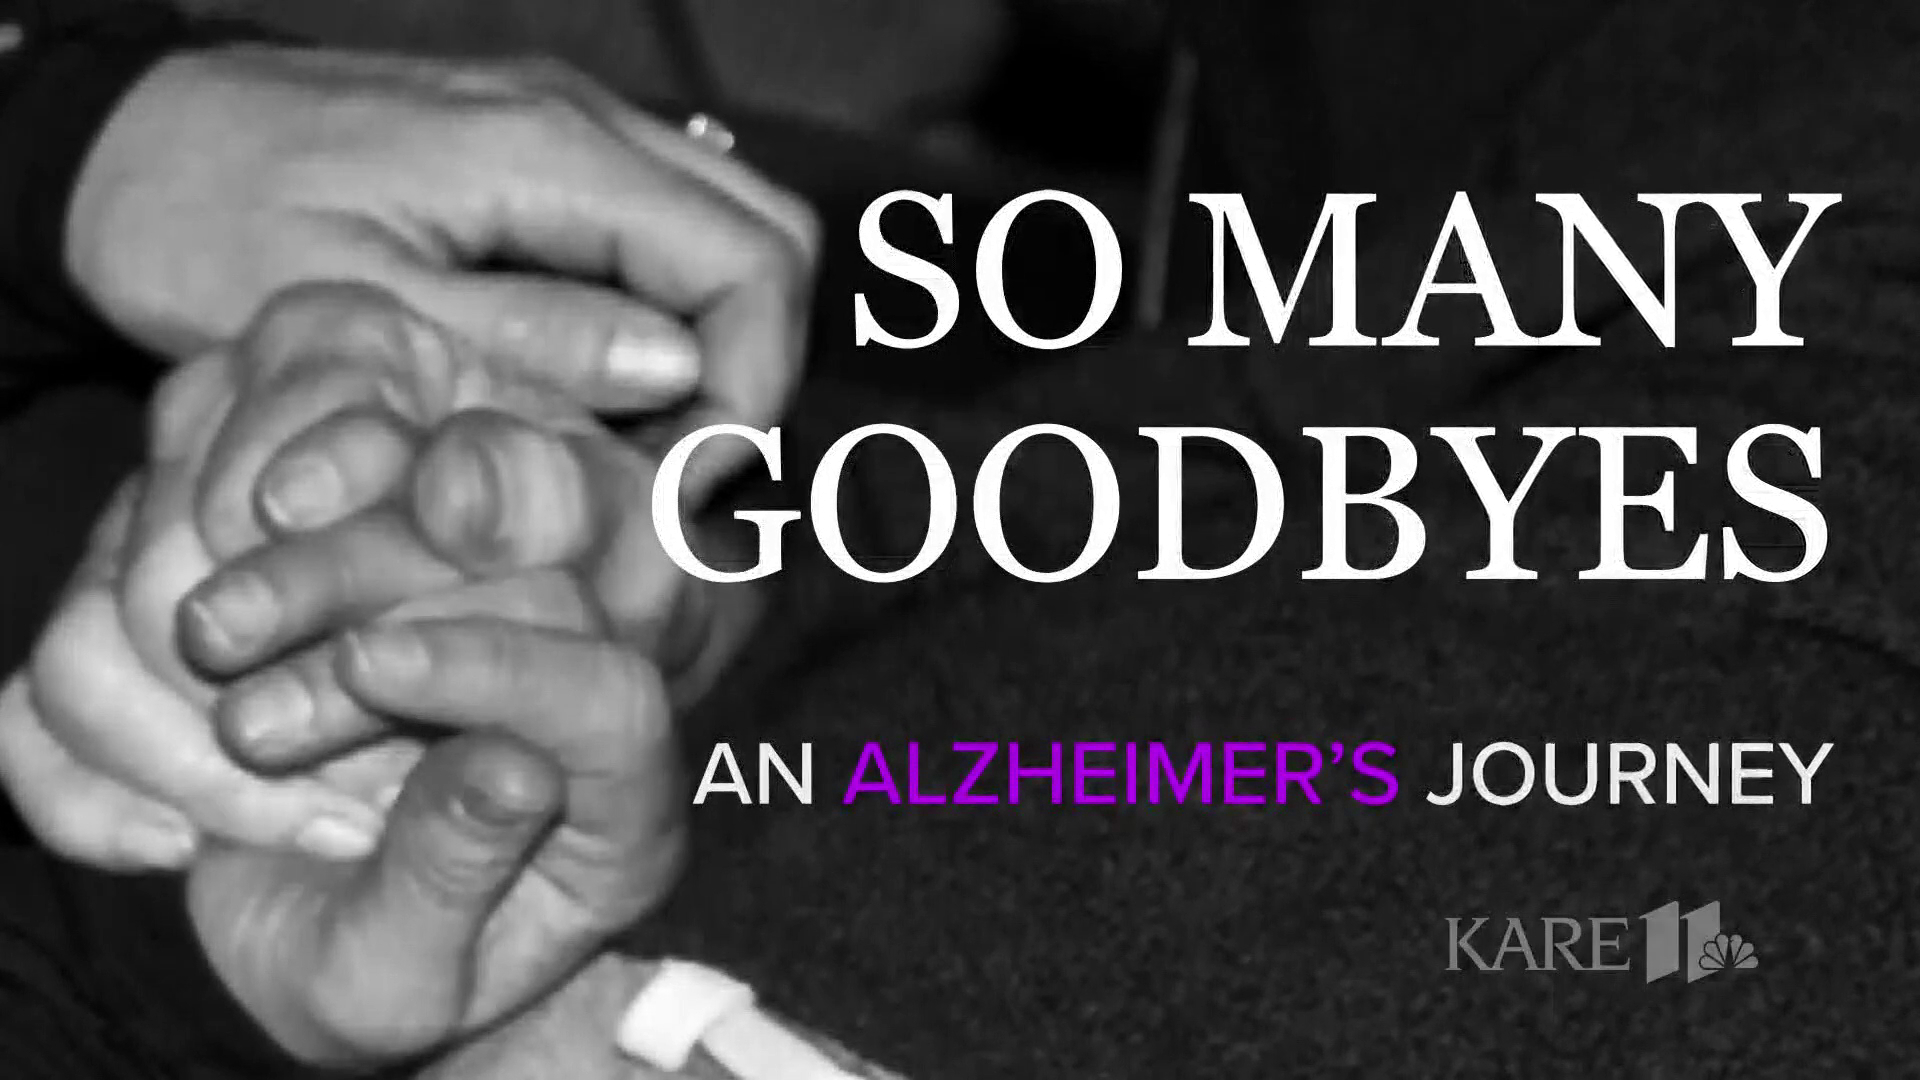 Millions of families are on a journey no one wants to be on, struggling with Alzheimer's disease. Karla Hult knows it well, and shares her story in this 2020 special